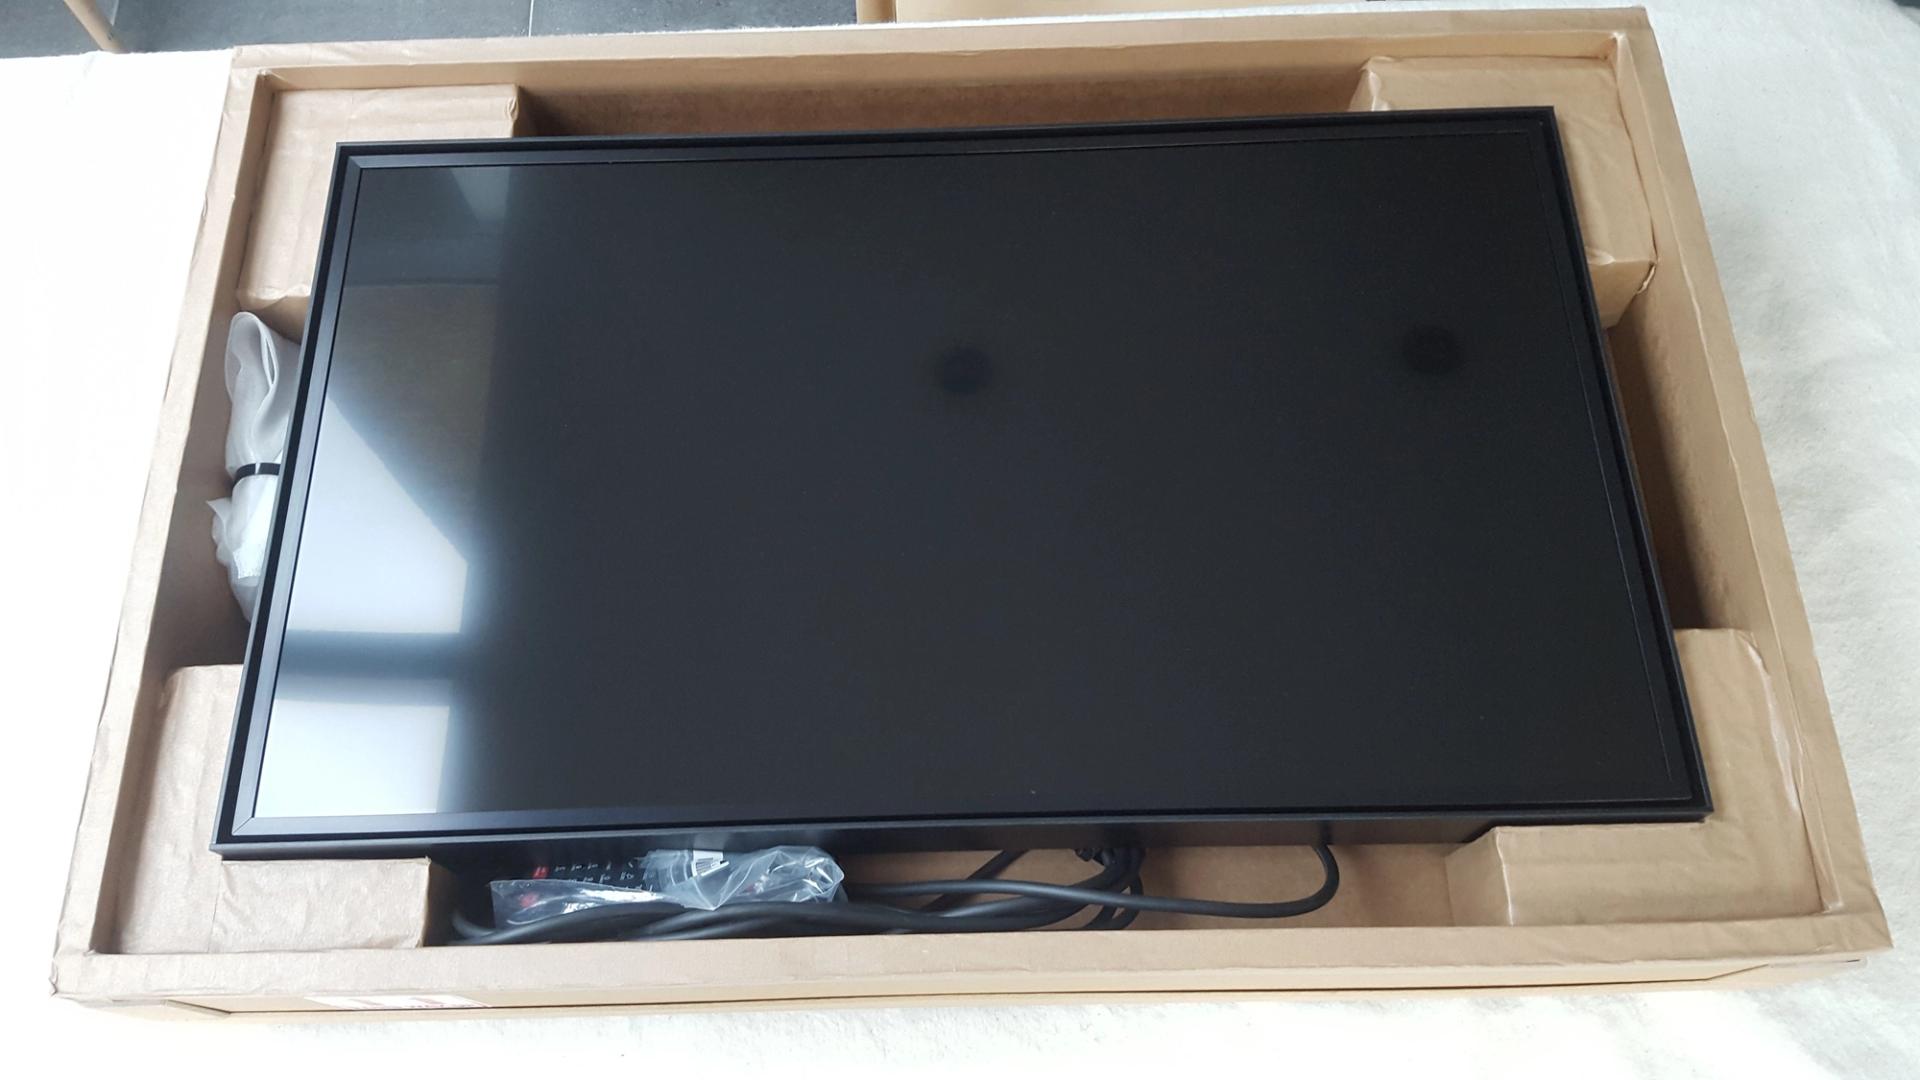 32" screen in packing crate